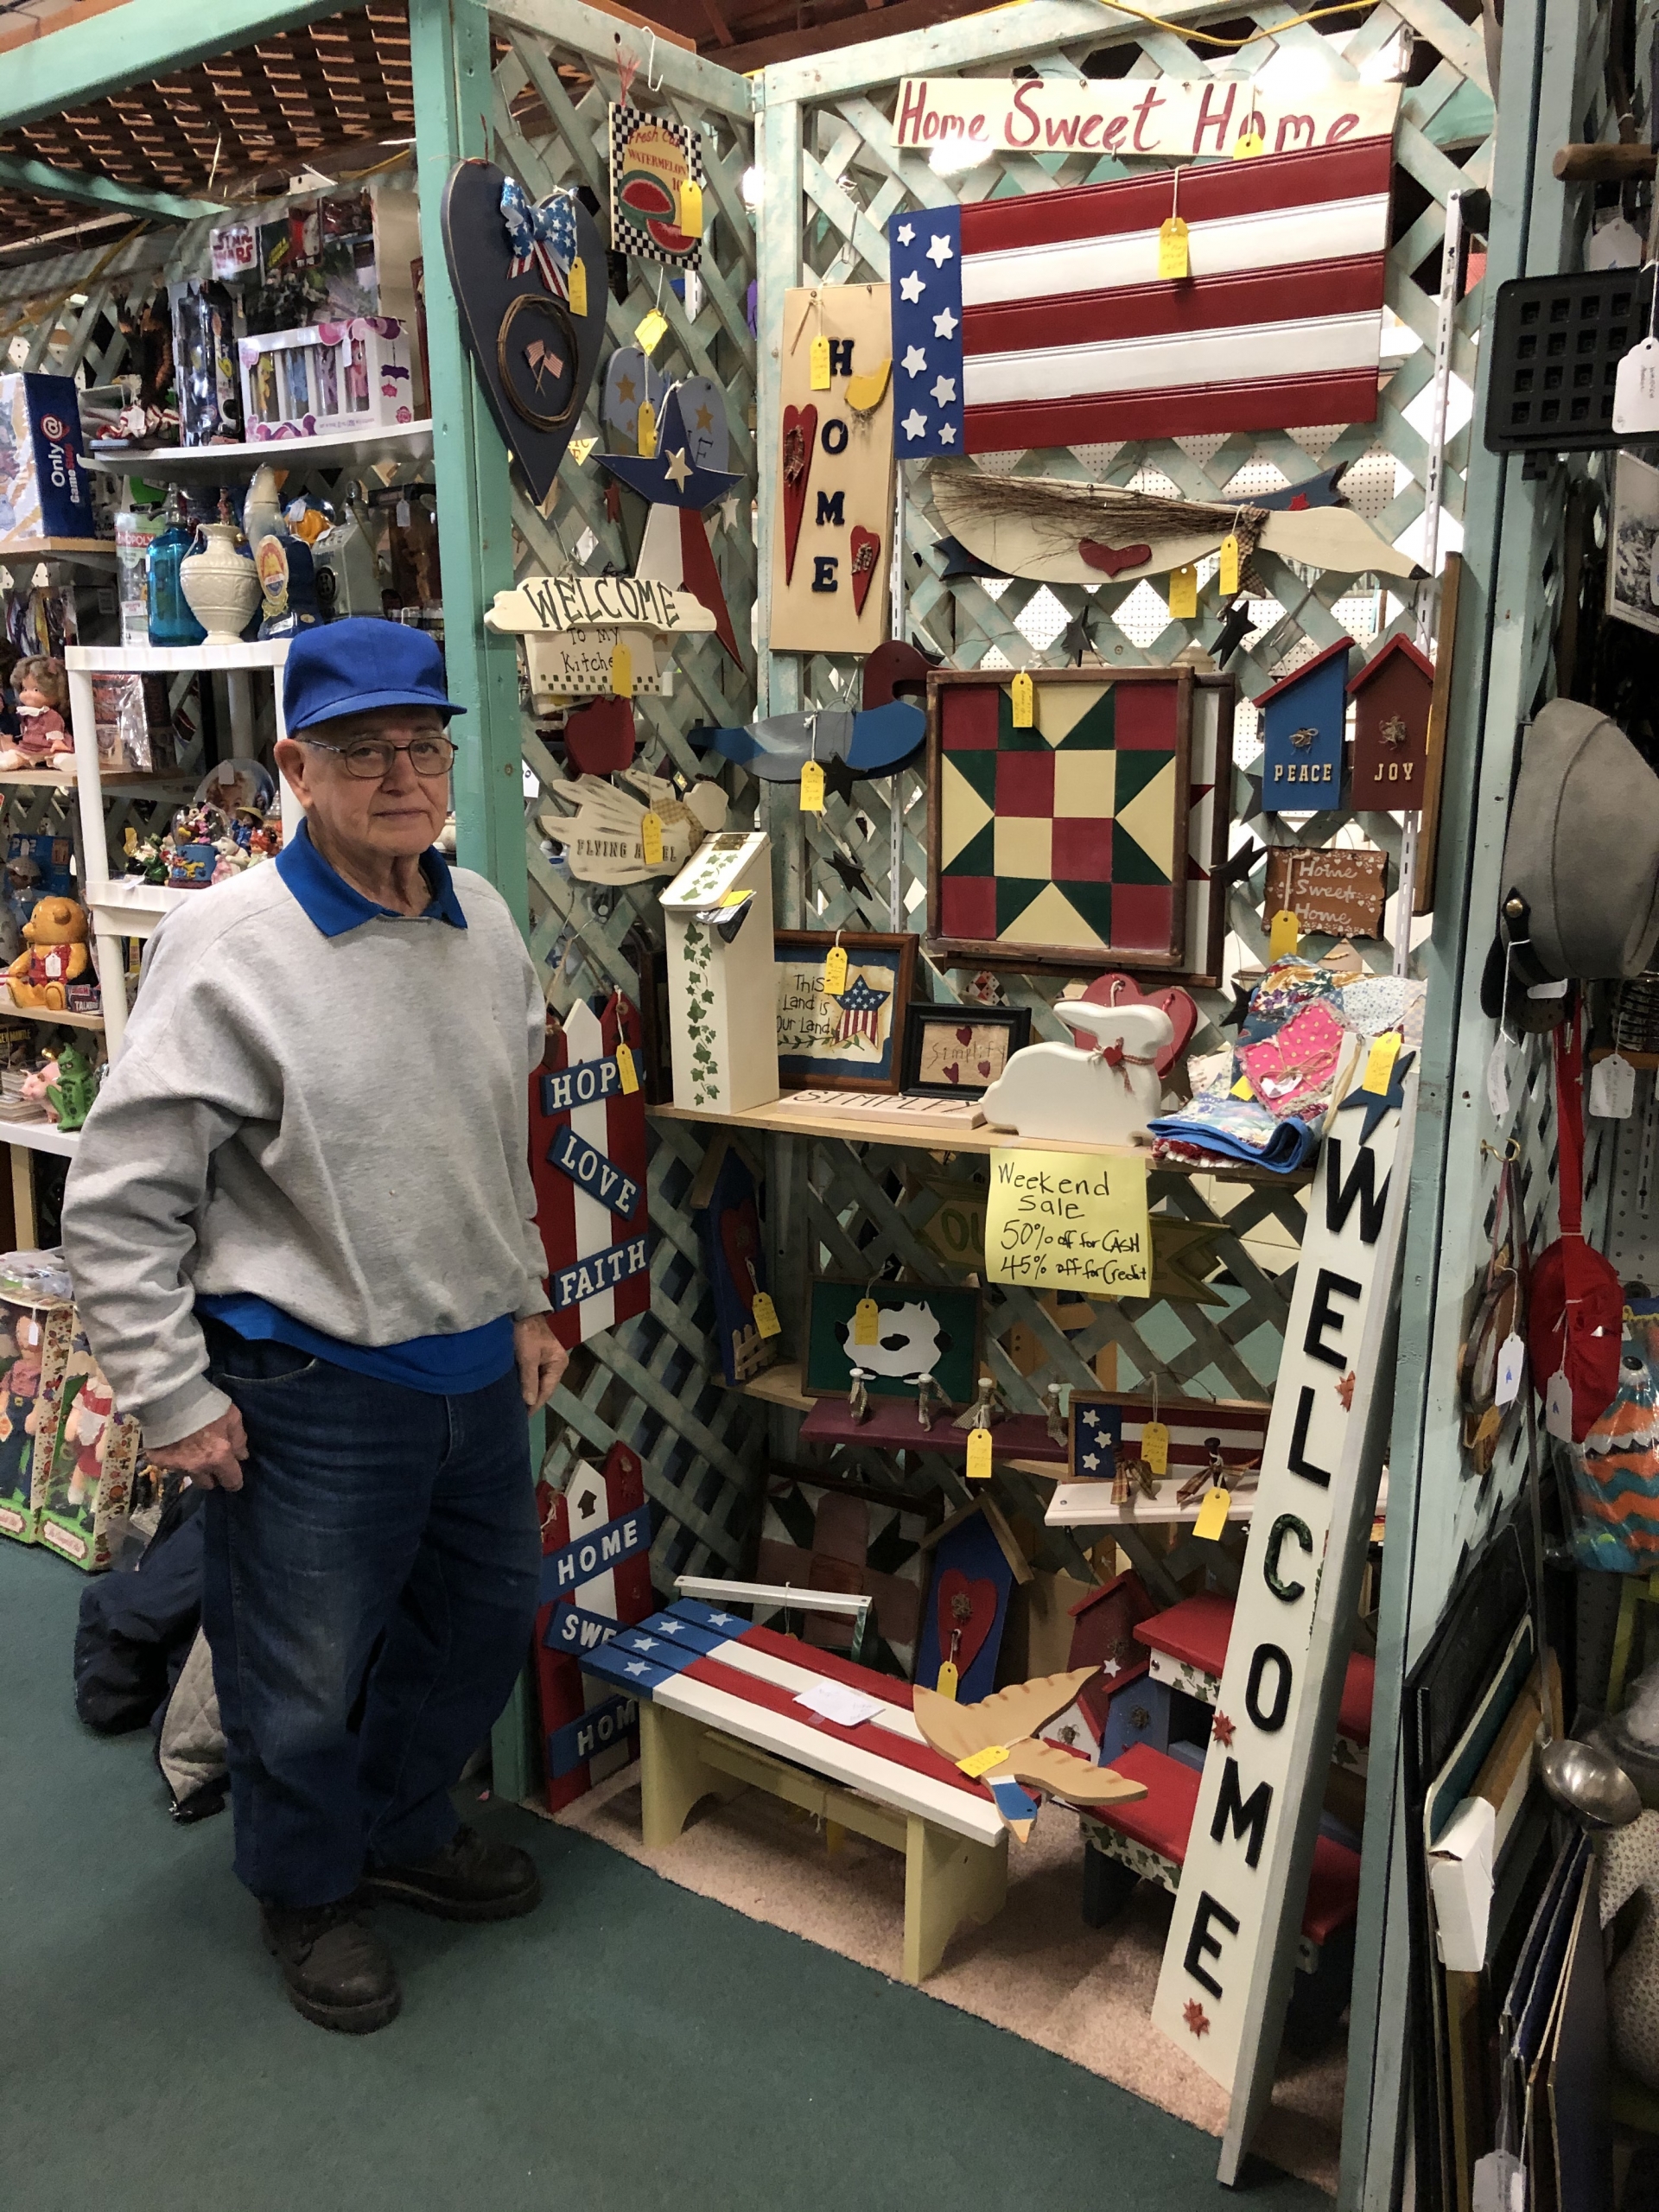 Featured Dealer: Booth 33 - Scranberry Coop - Vintage Store - Antiques, Collectibles, & More